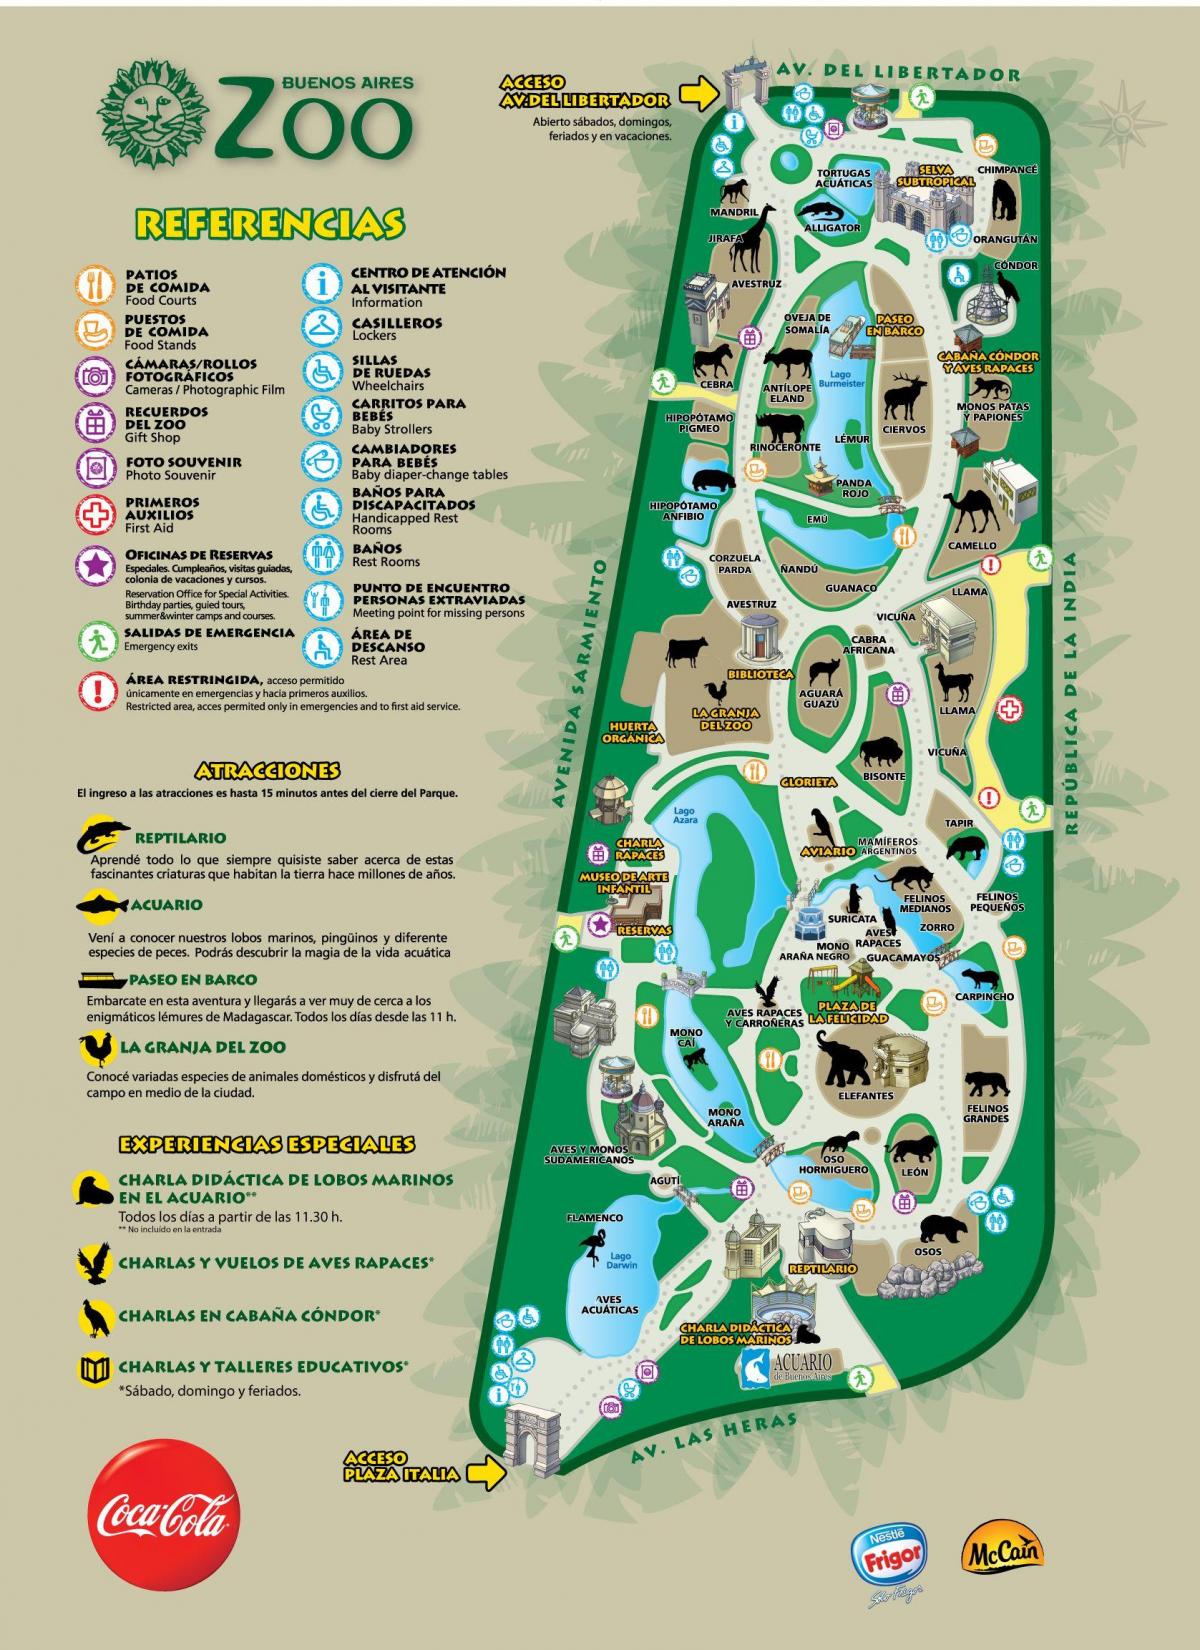 Buenos Aires zoo park map